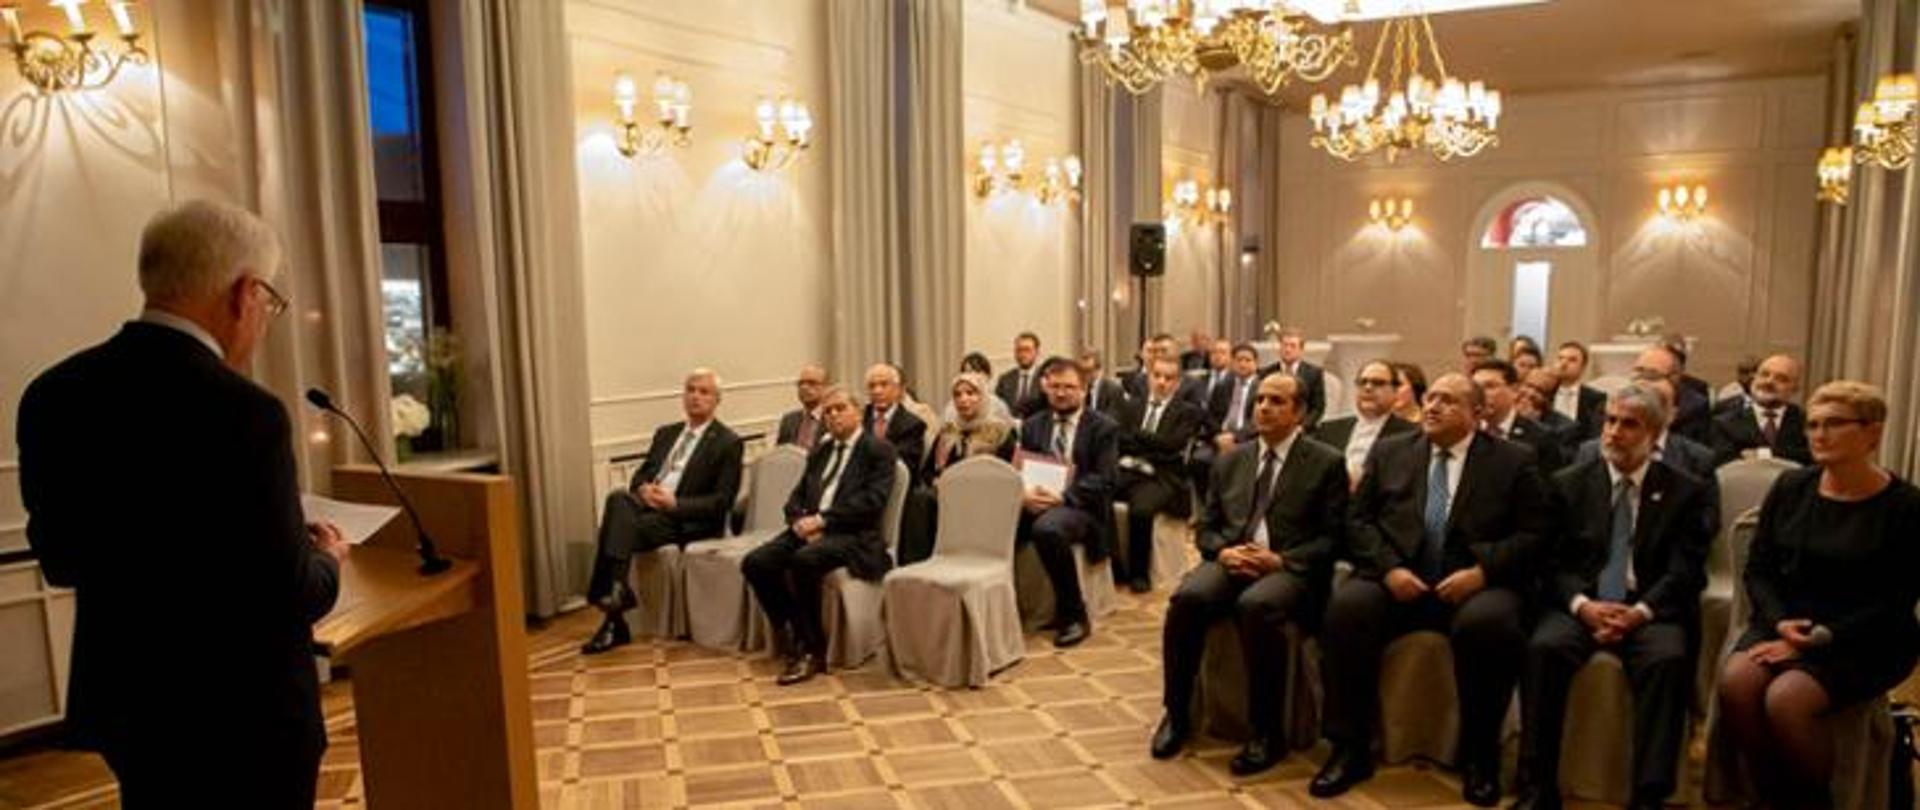 Minister Jacek Czaputowicz hosts iftar meal for Ambassadors of Muslim countries on the occasion of Ramadan